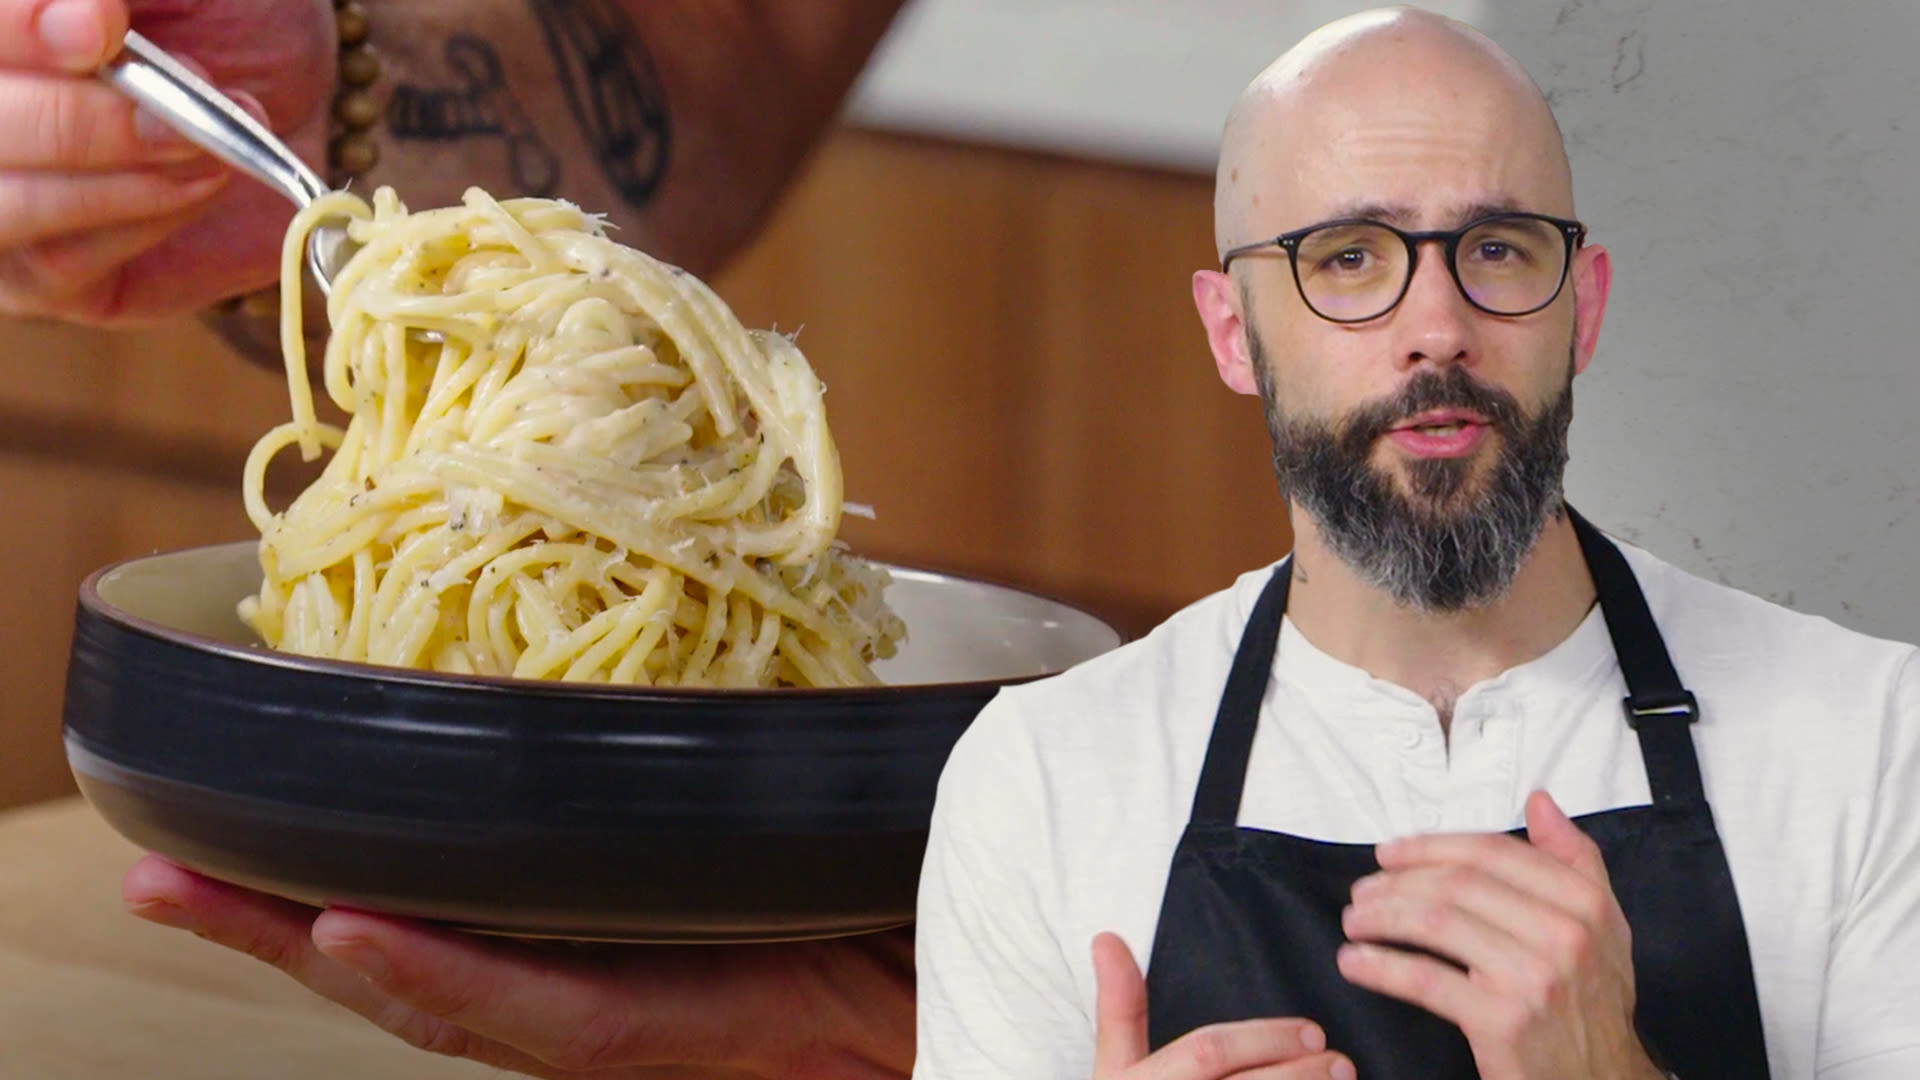 Watch The Cacio e Pepe Hack That Never Fails (Ft. Binging with Babish) |  Epicurious 101 | Epicurious